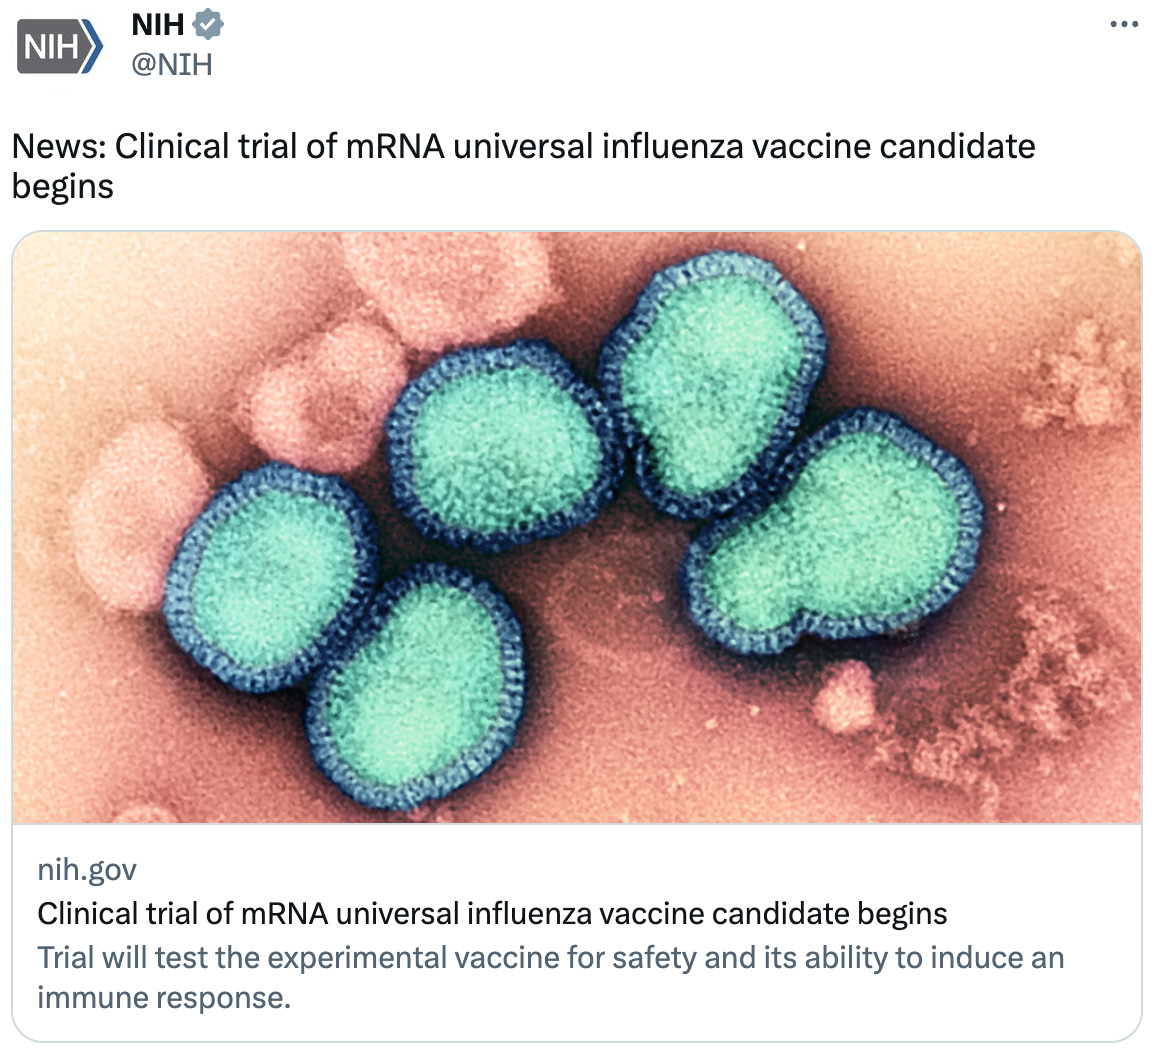  NIH @NIH News: Clinical trial of mRNA universal influenza vaccine candidate begins nih.gov Clinical trial of mRNA universal influenza vaccine candidate begins Trial will test the experimental vaccine for safety and its ability to induce an immune response.